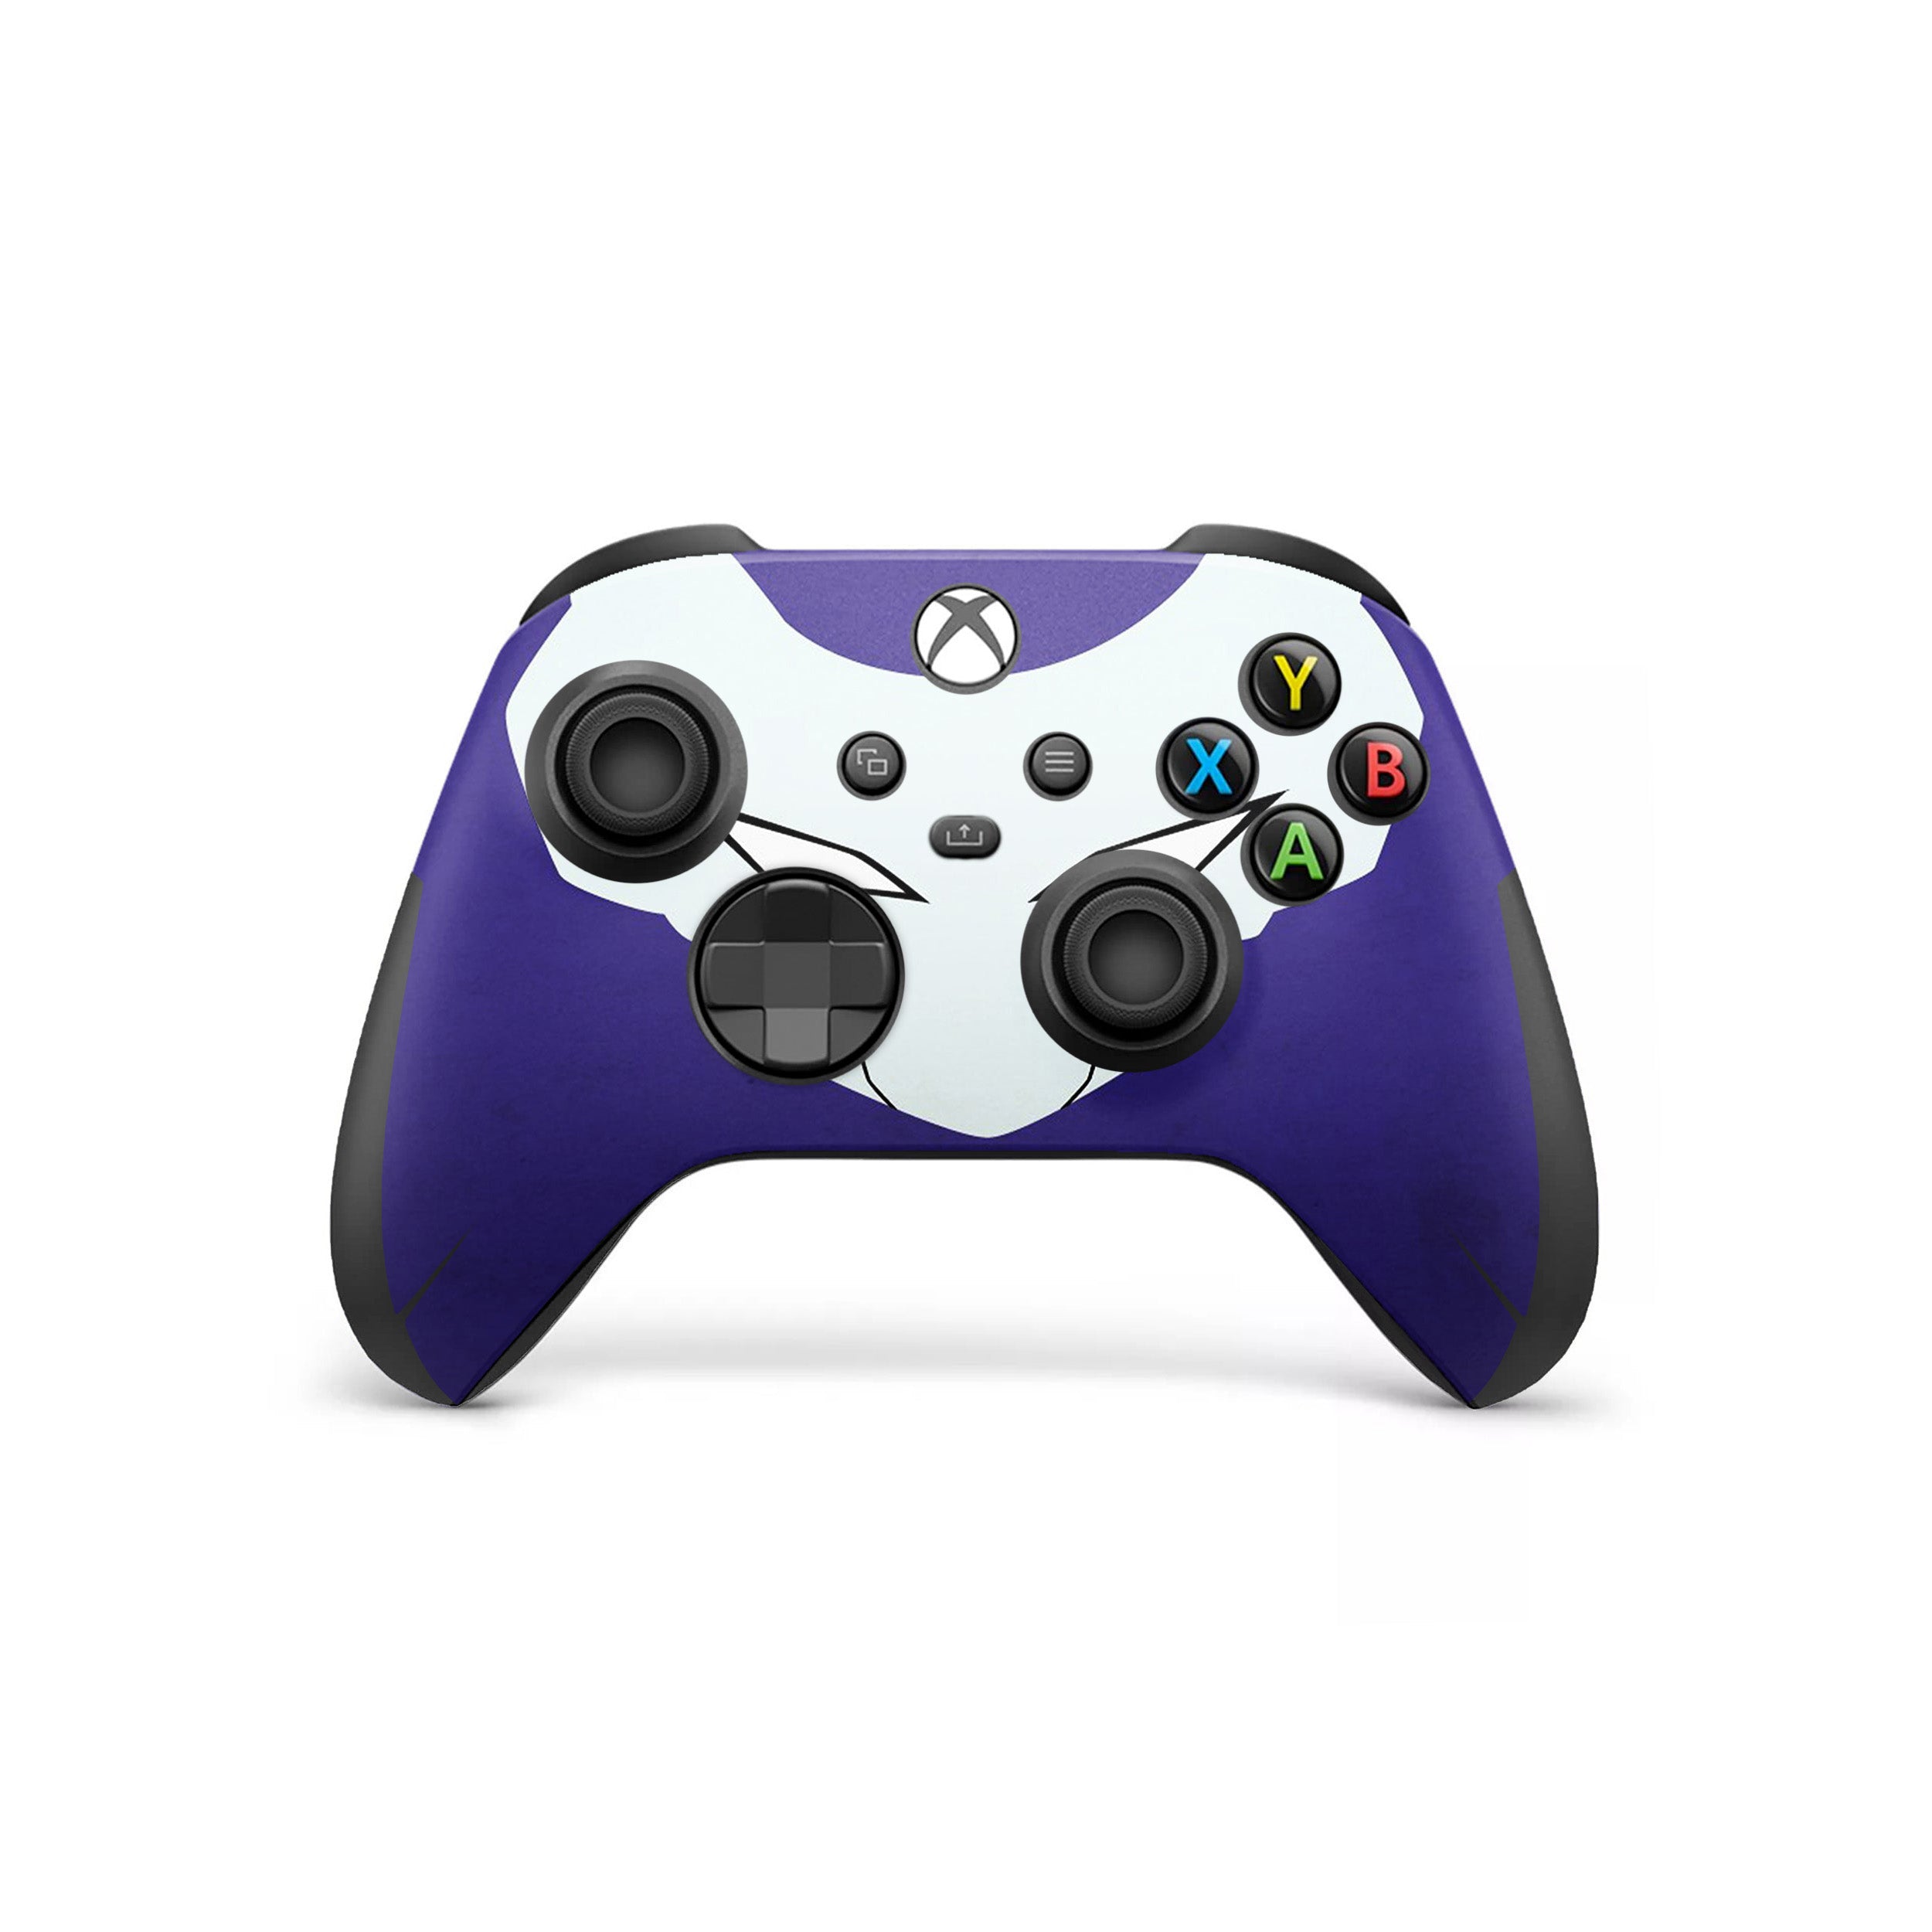 A video game skin featuring a Dragon Ball Z Frieza design for the Xbox Wireless Controller.